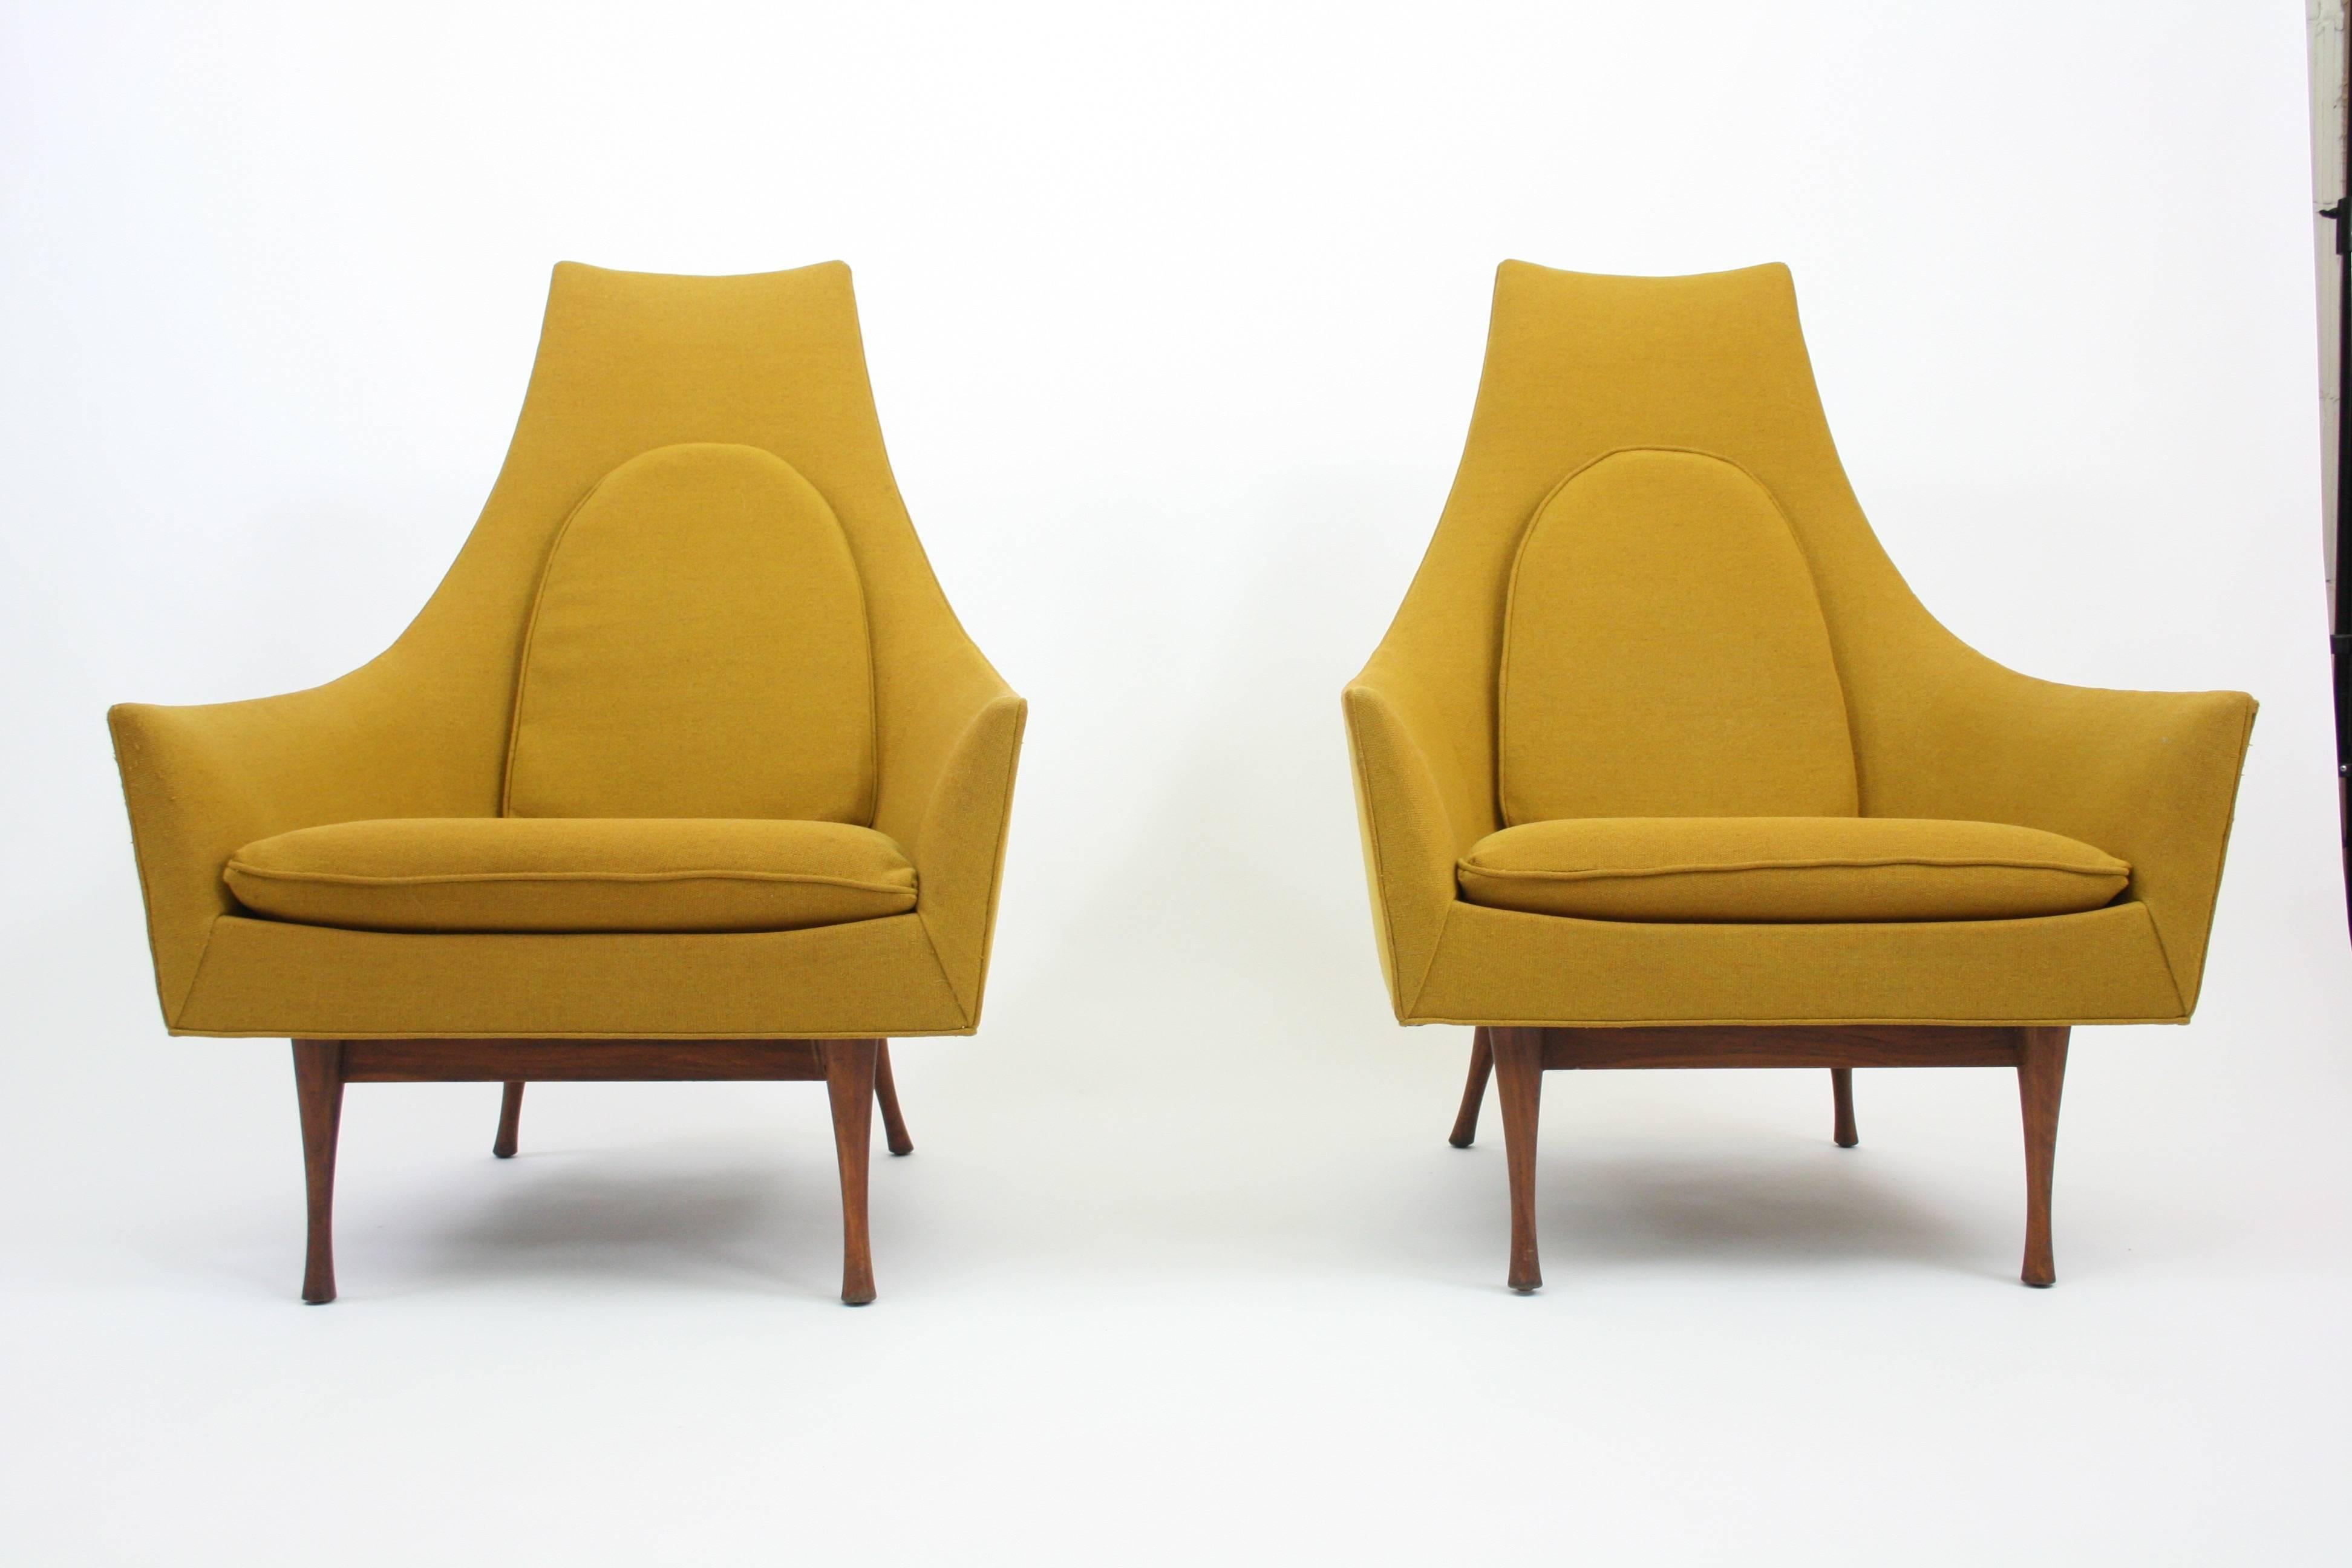 Rare Pair of Lounge Chairs by Paul McCobb for Widdicomb 1